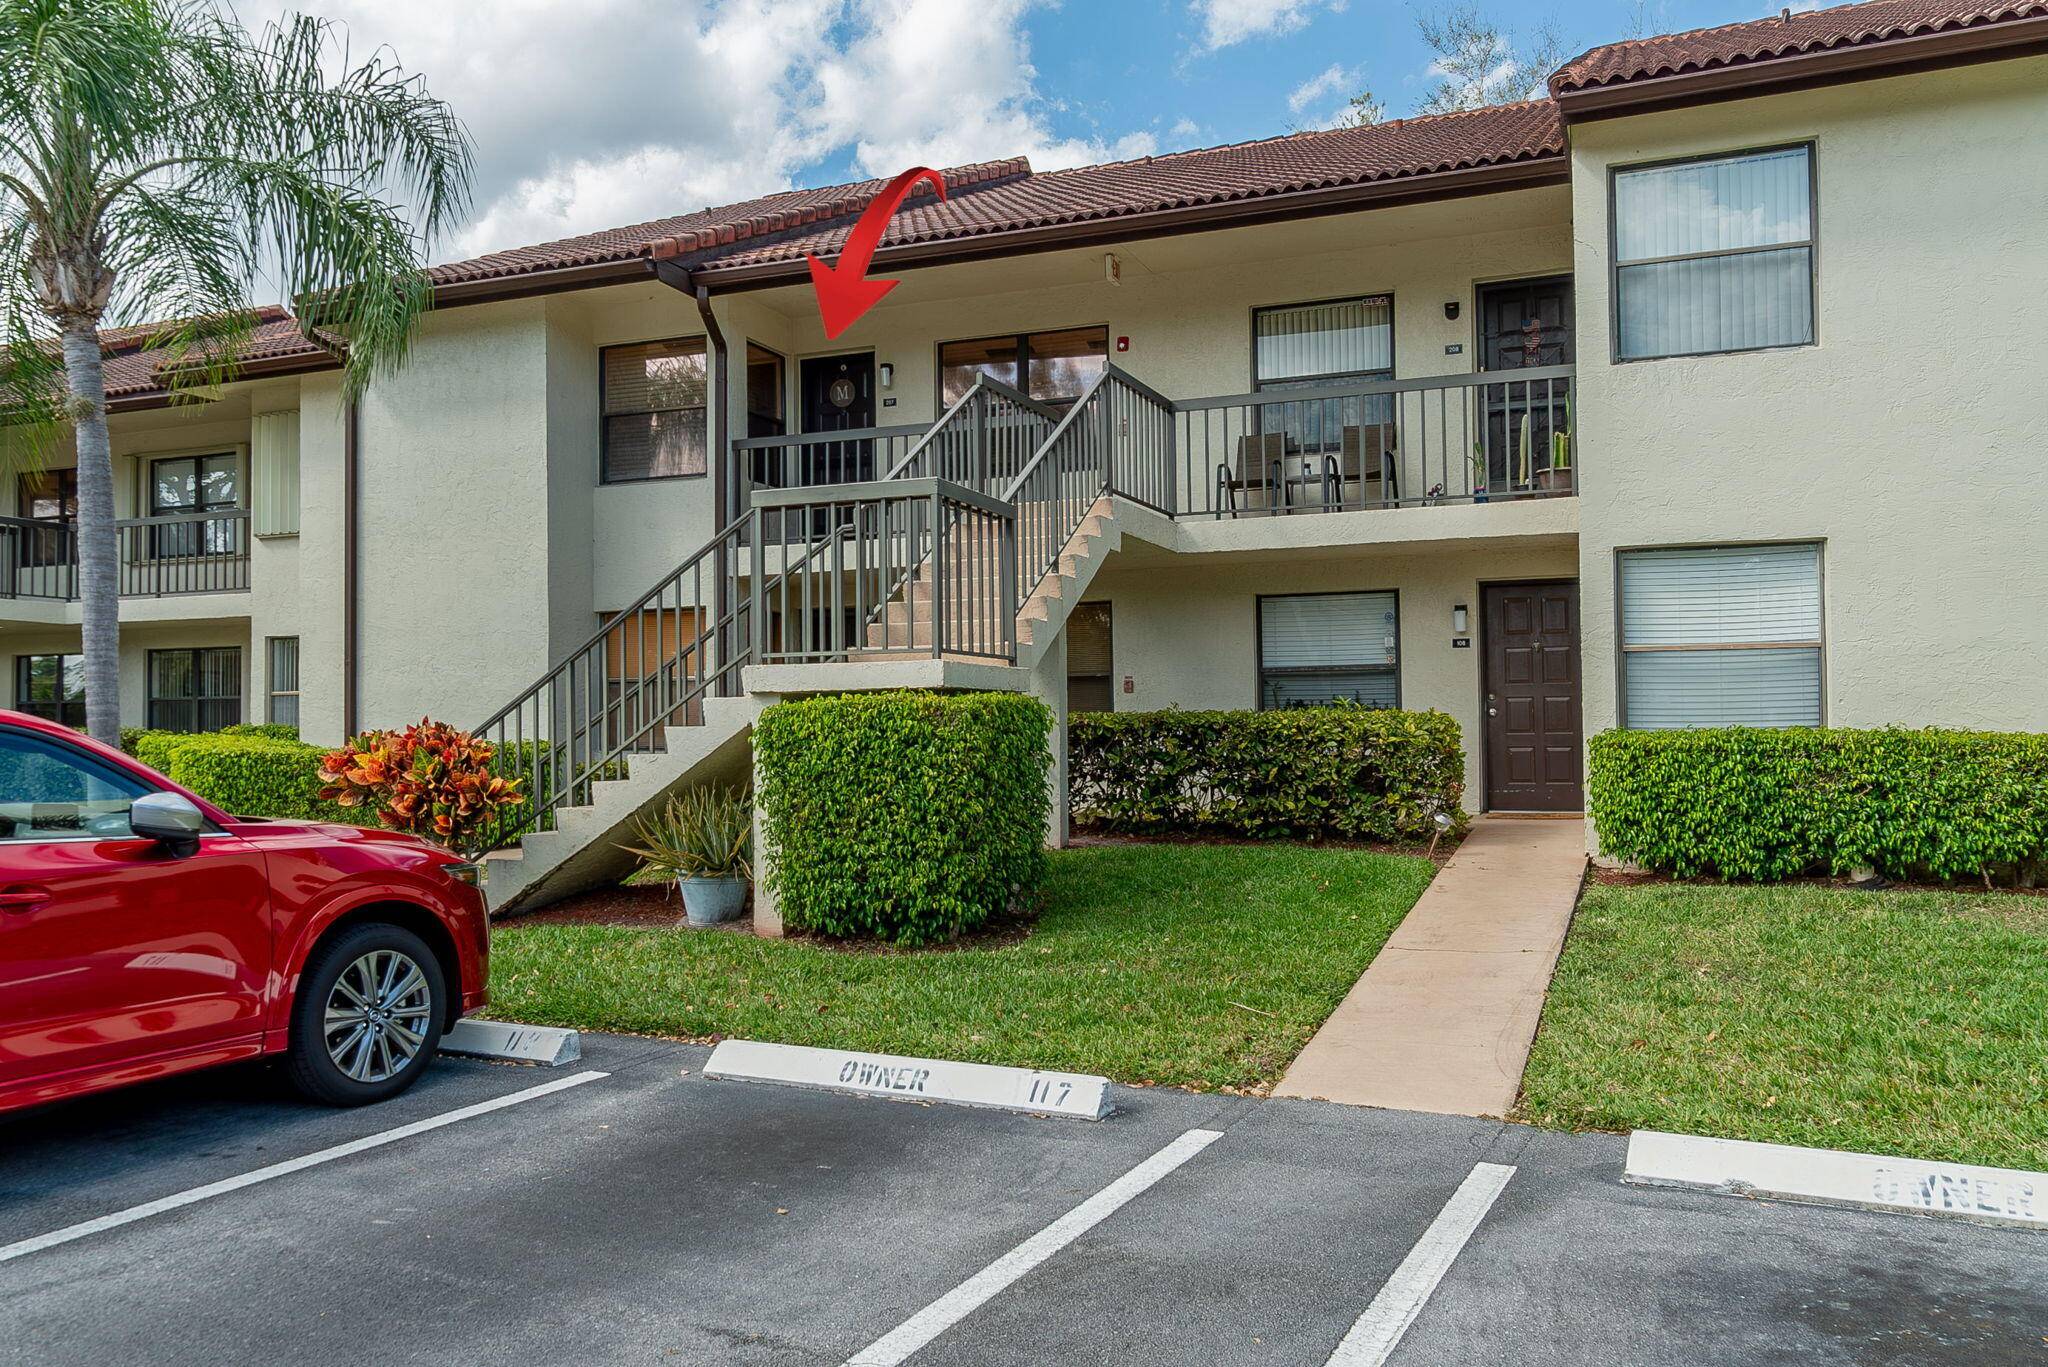 This beautifully remodeled 2 bedroom, 2 bathroom condo is nestled in the serene 55 community of Lucerne Lakes in Lake Worth, The home features a range of modern updates including ...